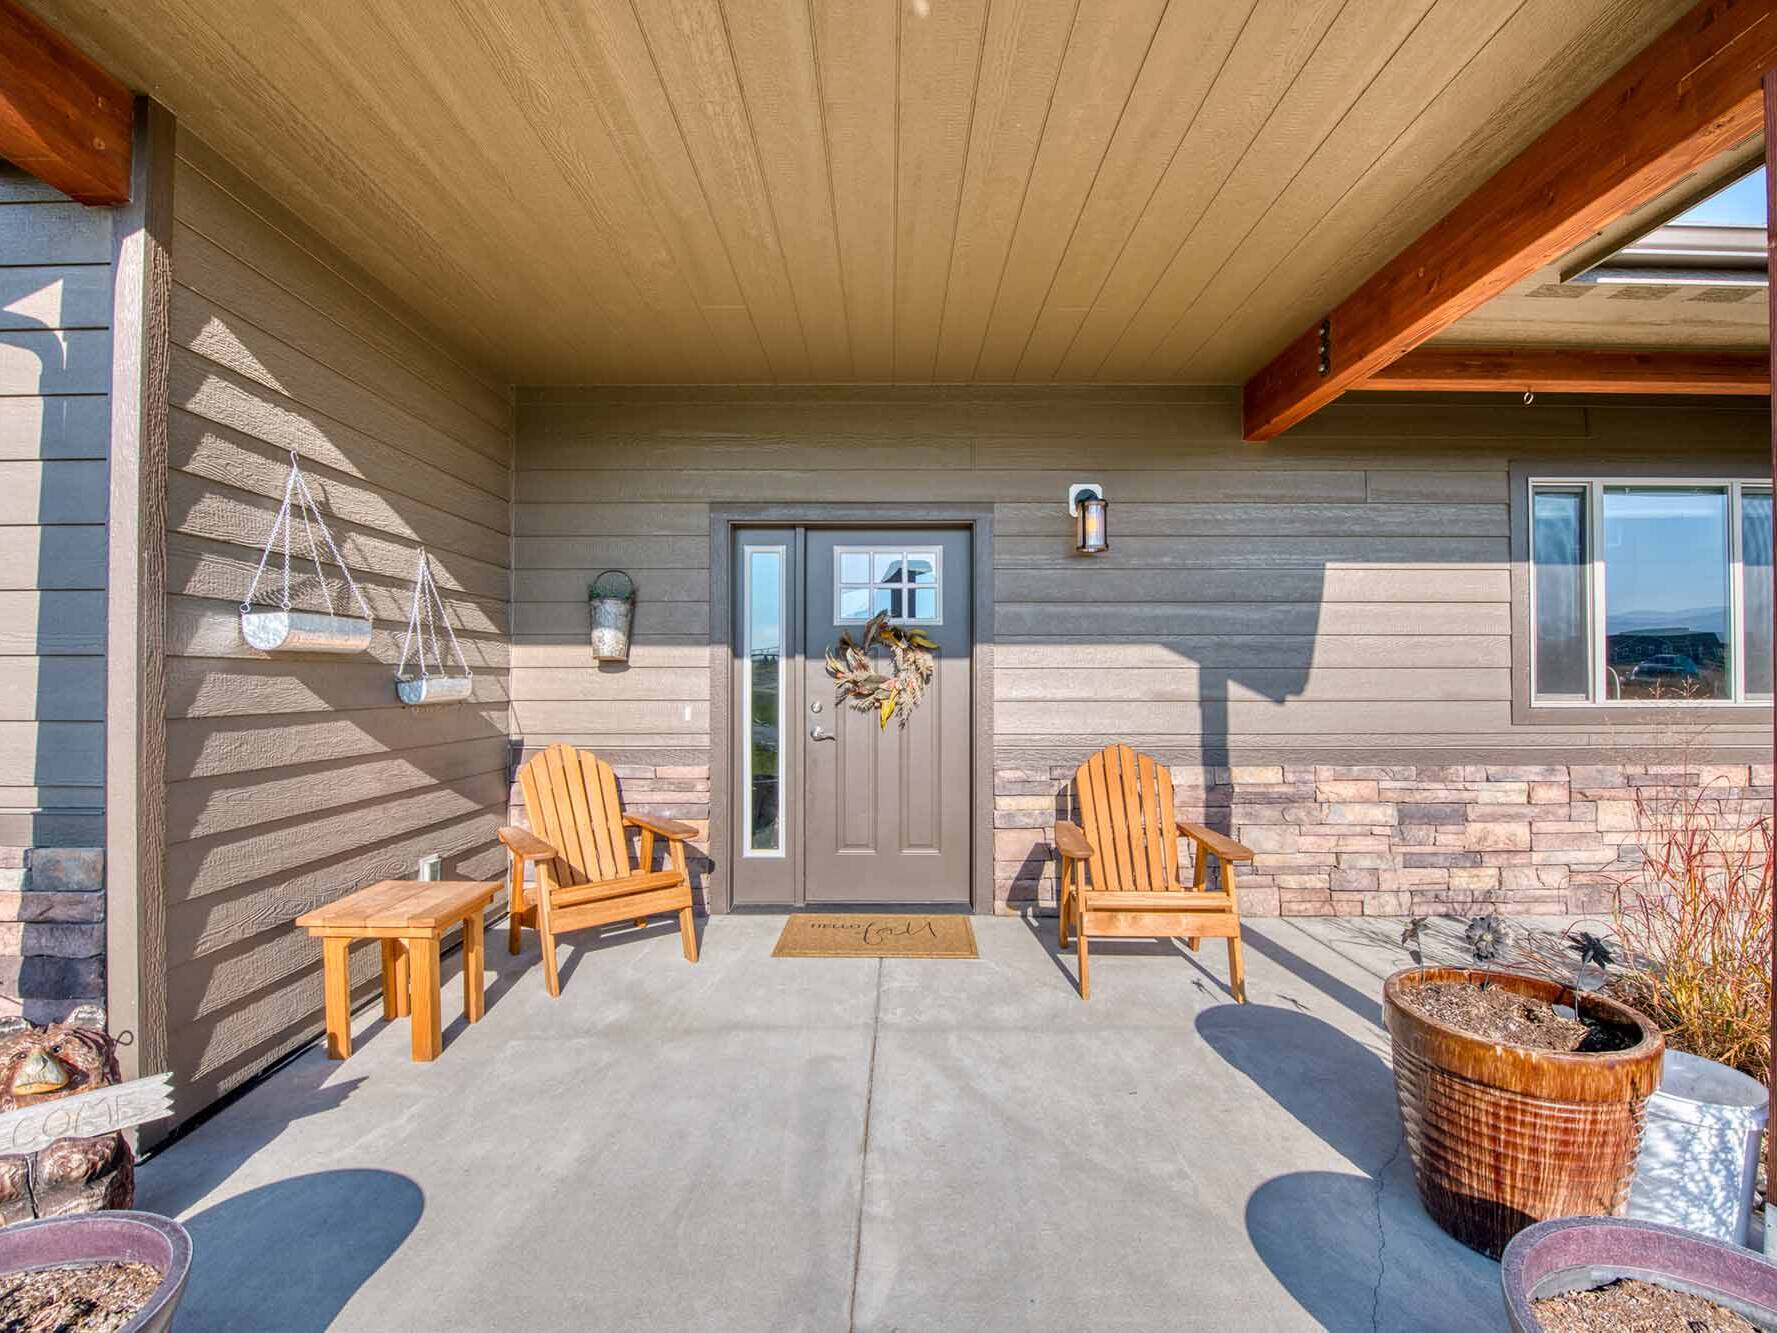 Entry porch of The Copper Creek model home - Built by Big Sky Builder in Florence, MT